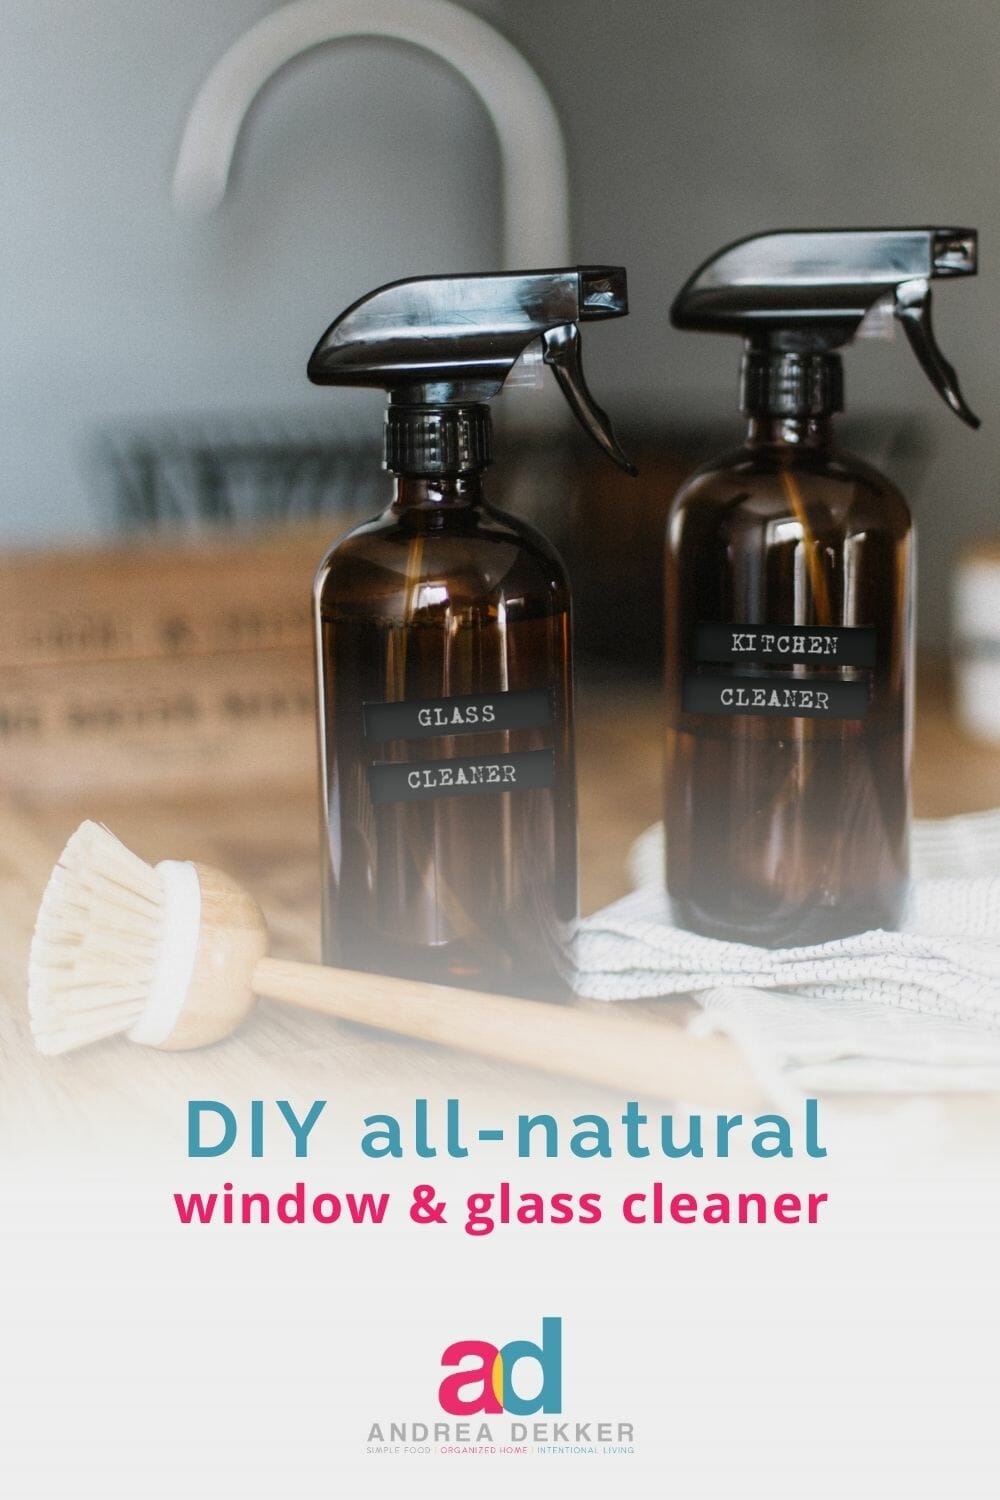 all-natural window and glass cleaner